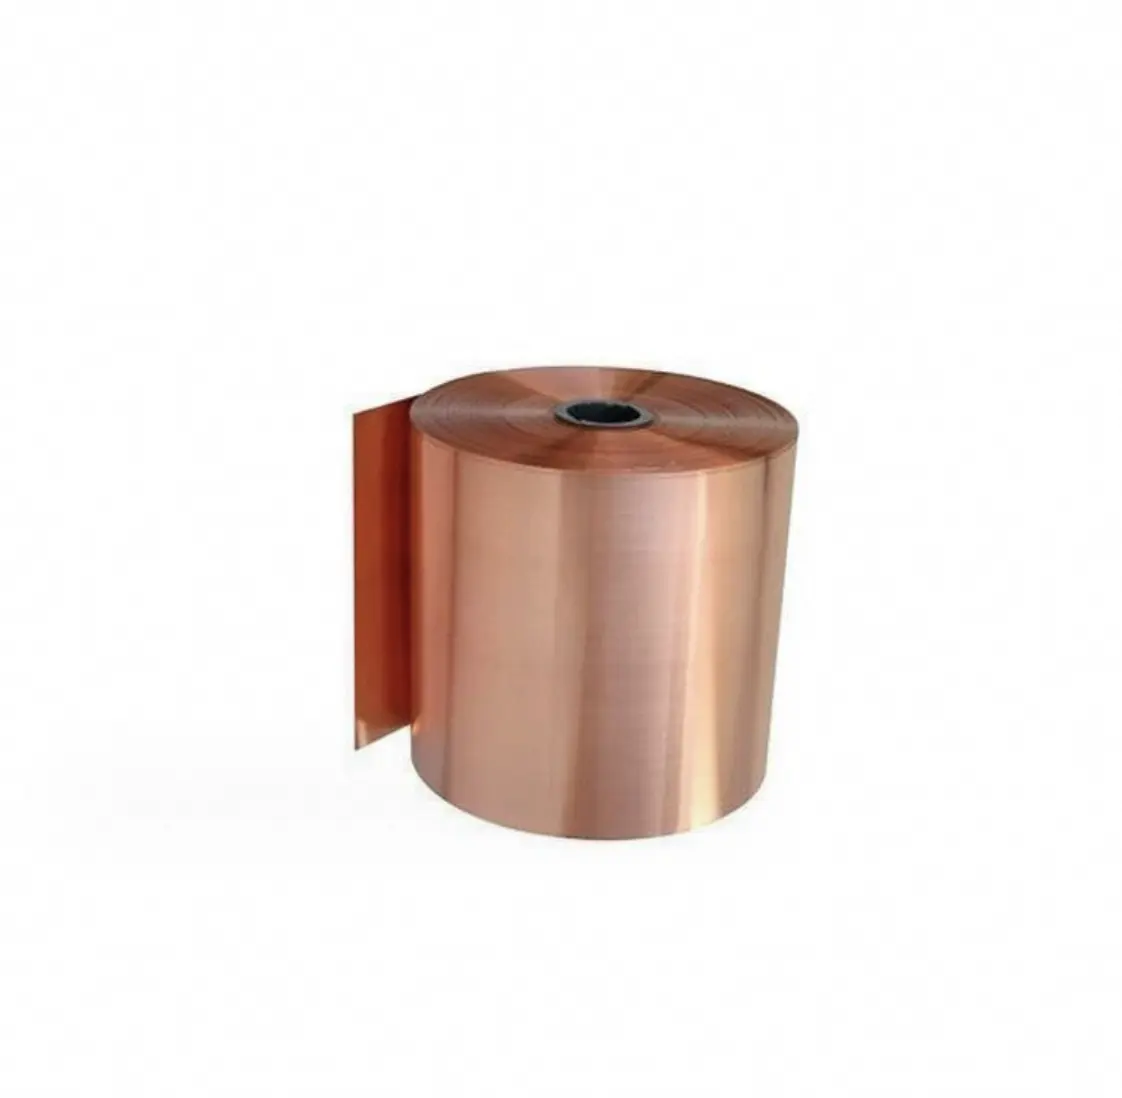 99.99% Pure Copper C1100 Plate/Sheet Low Price Manufacturers' Offer for Copper Cathode Coil Strip Spiral Coil